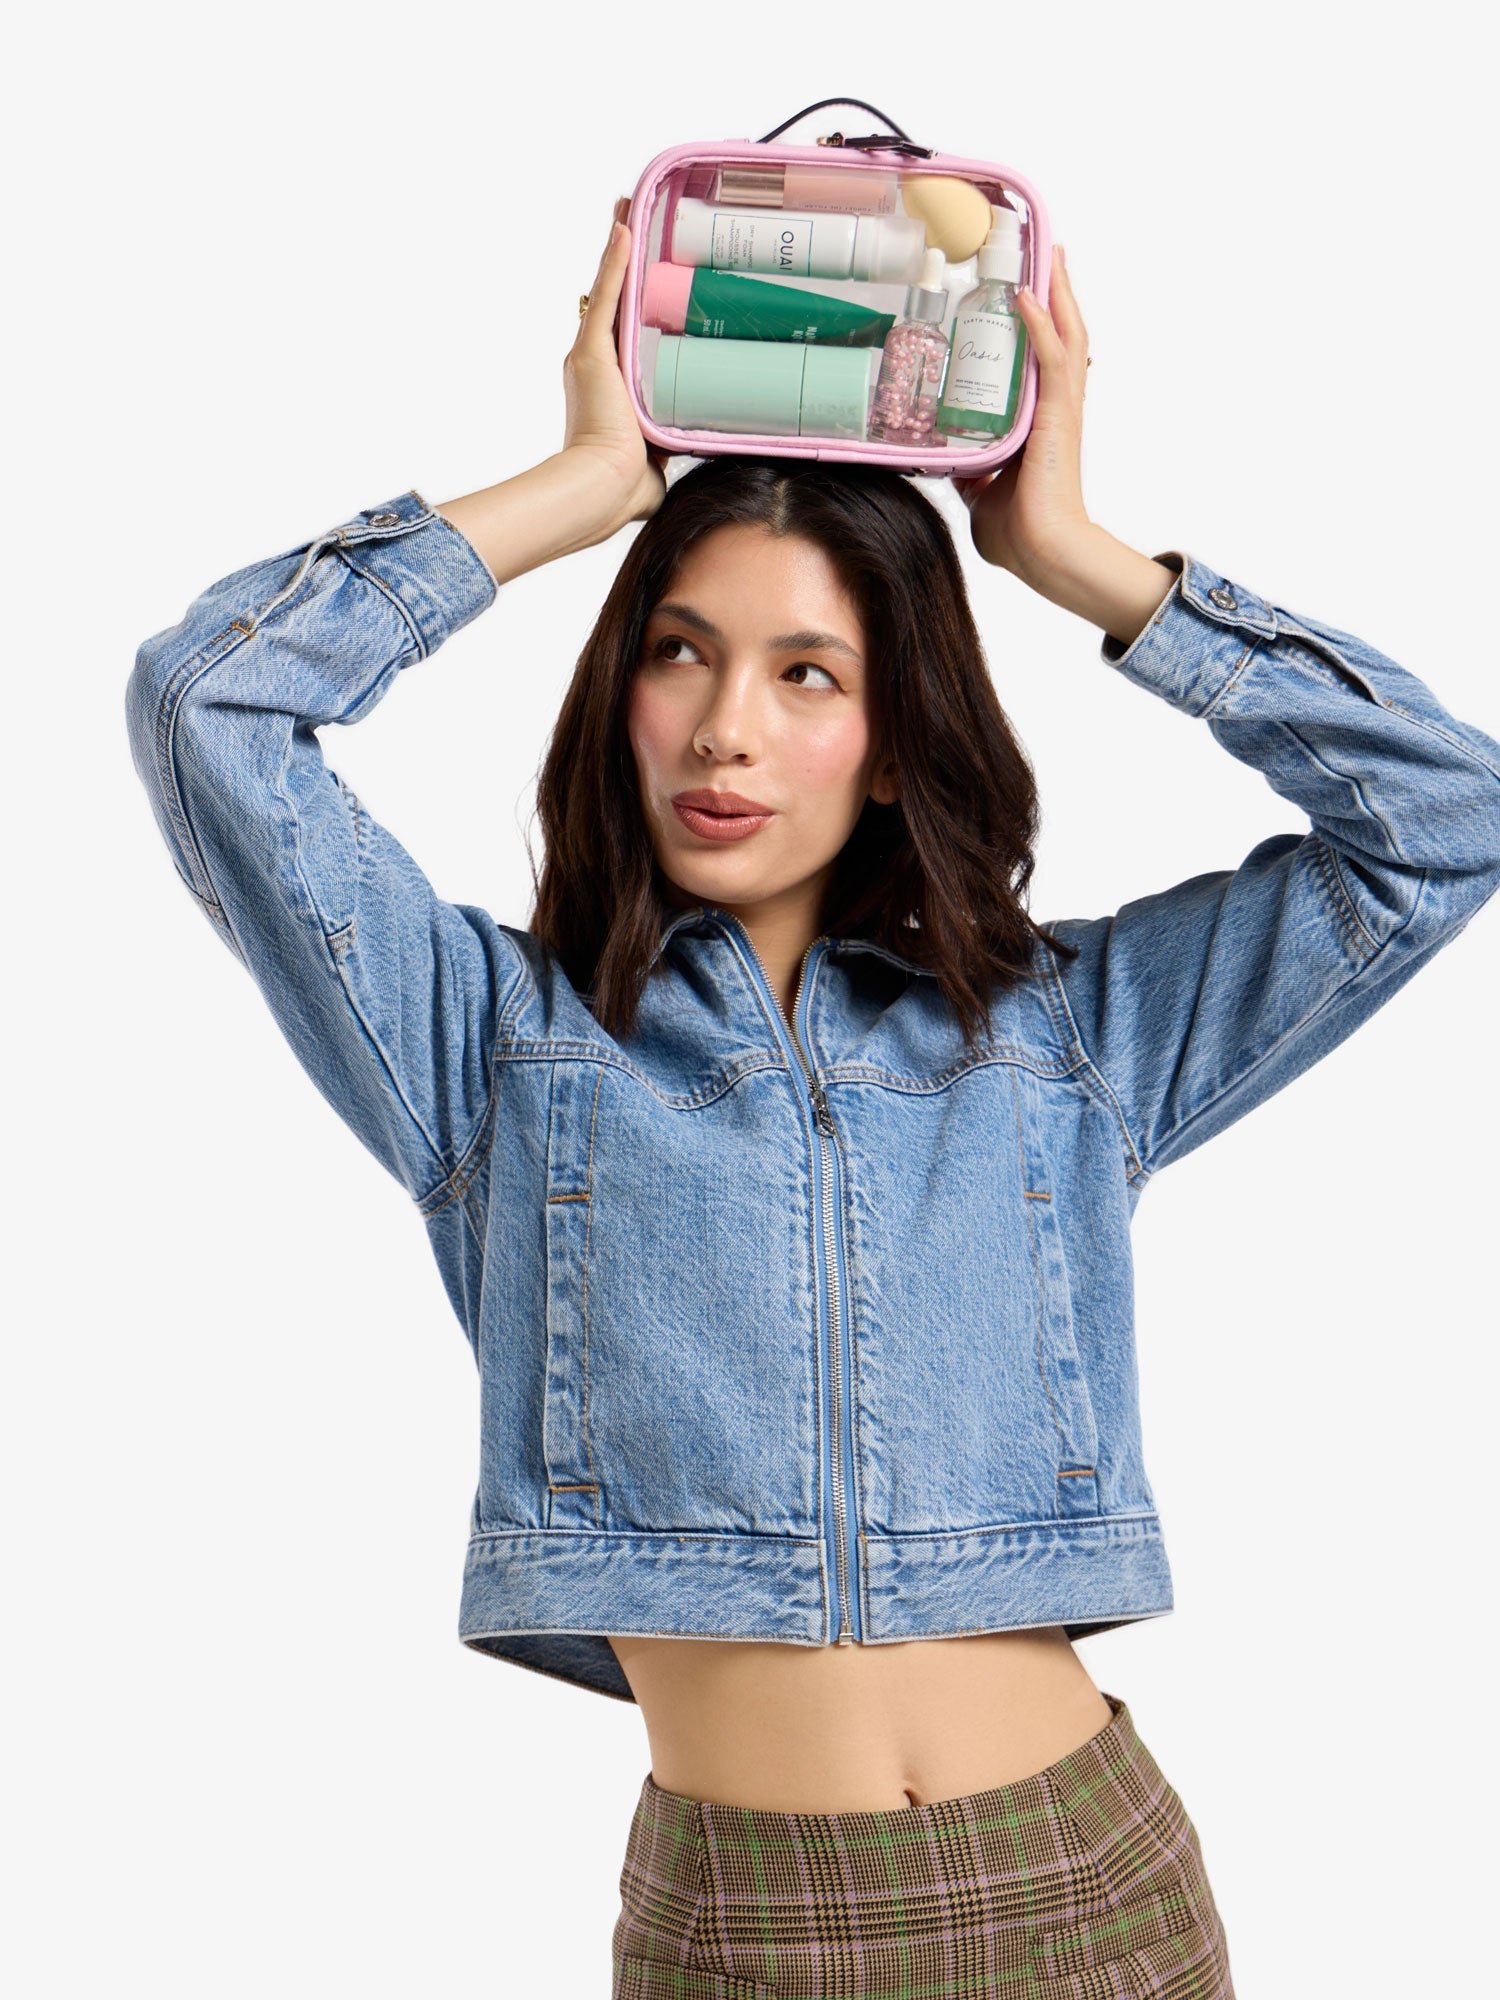 Model holding CALPAK small clear cosmetic case above head in pink